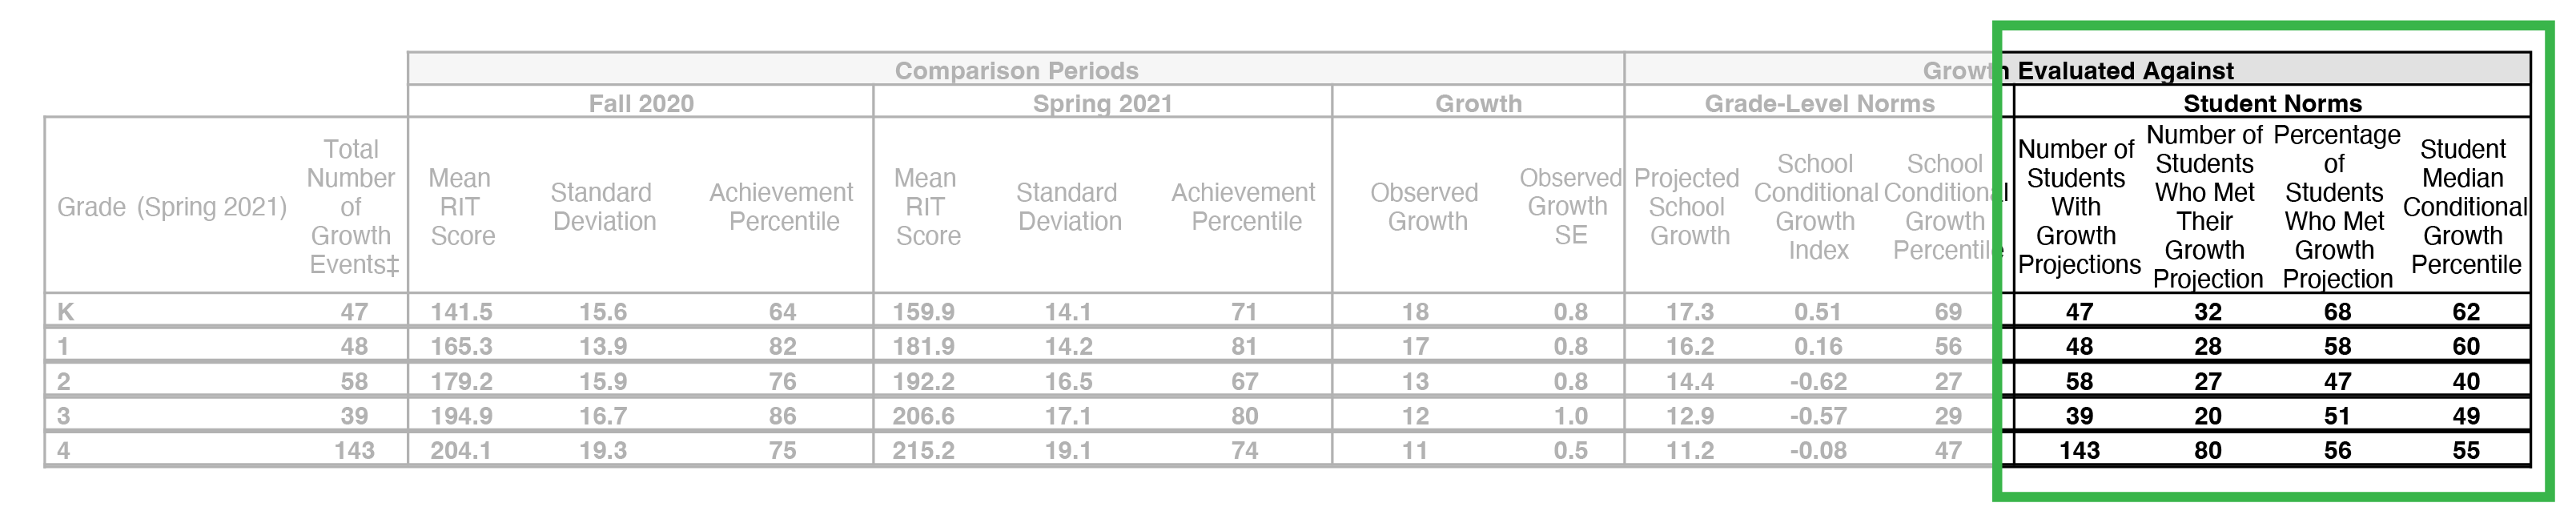 Example screenshot of the Student Norms section of the Student Growth Summary report.